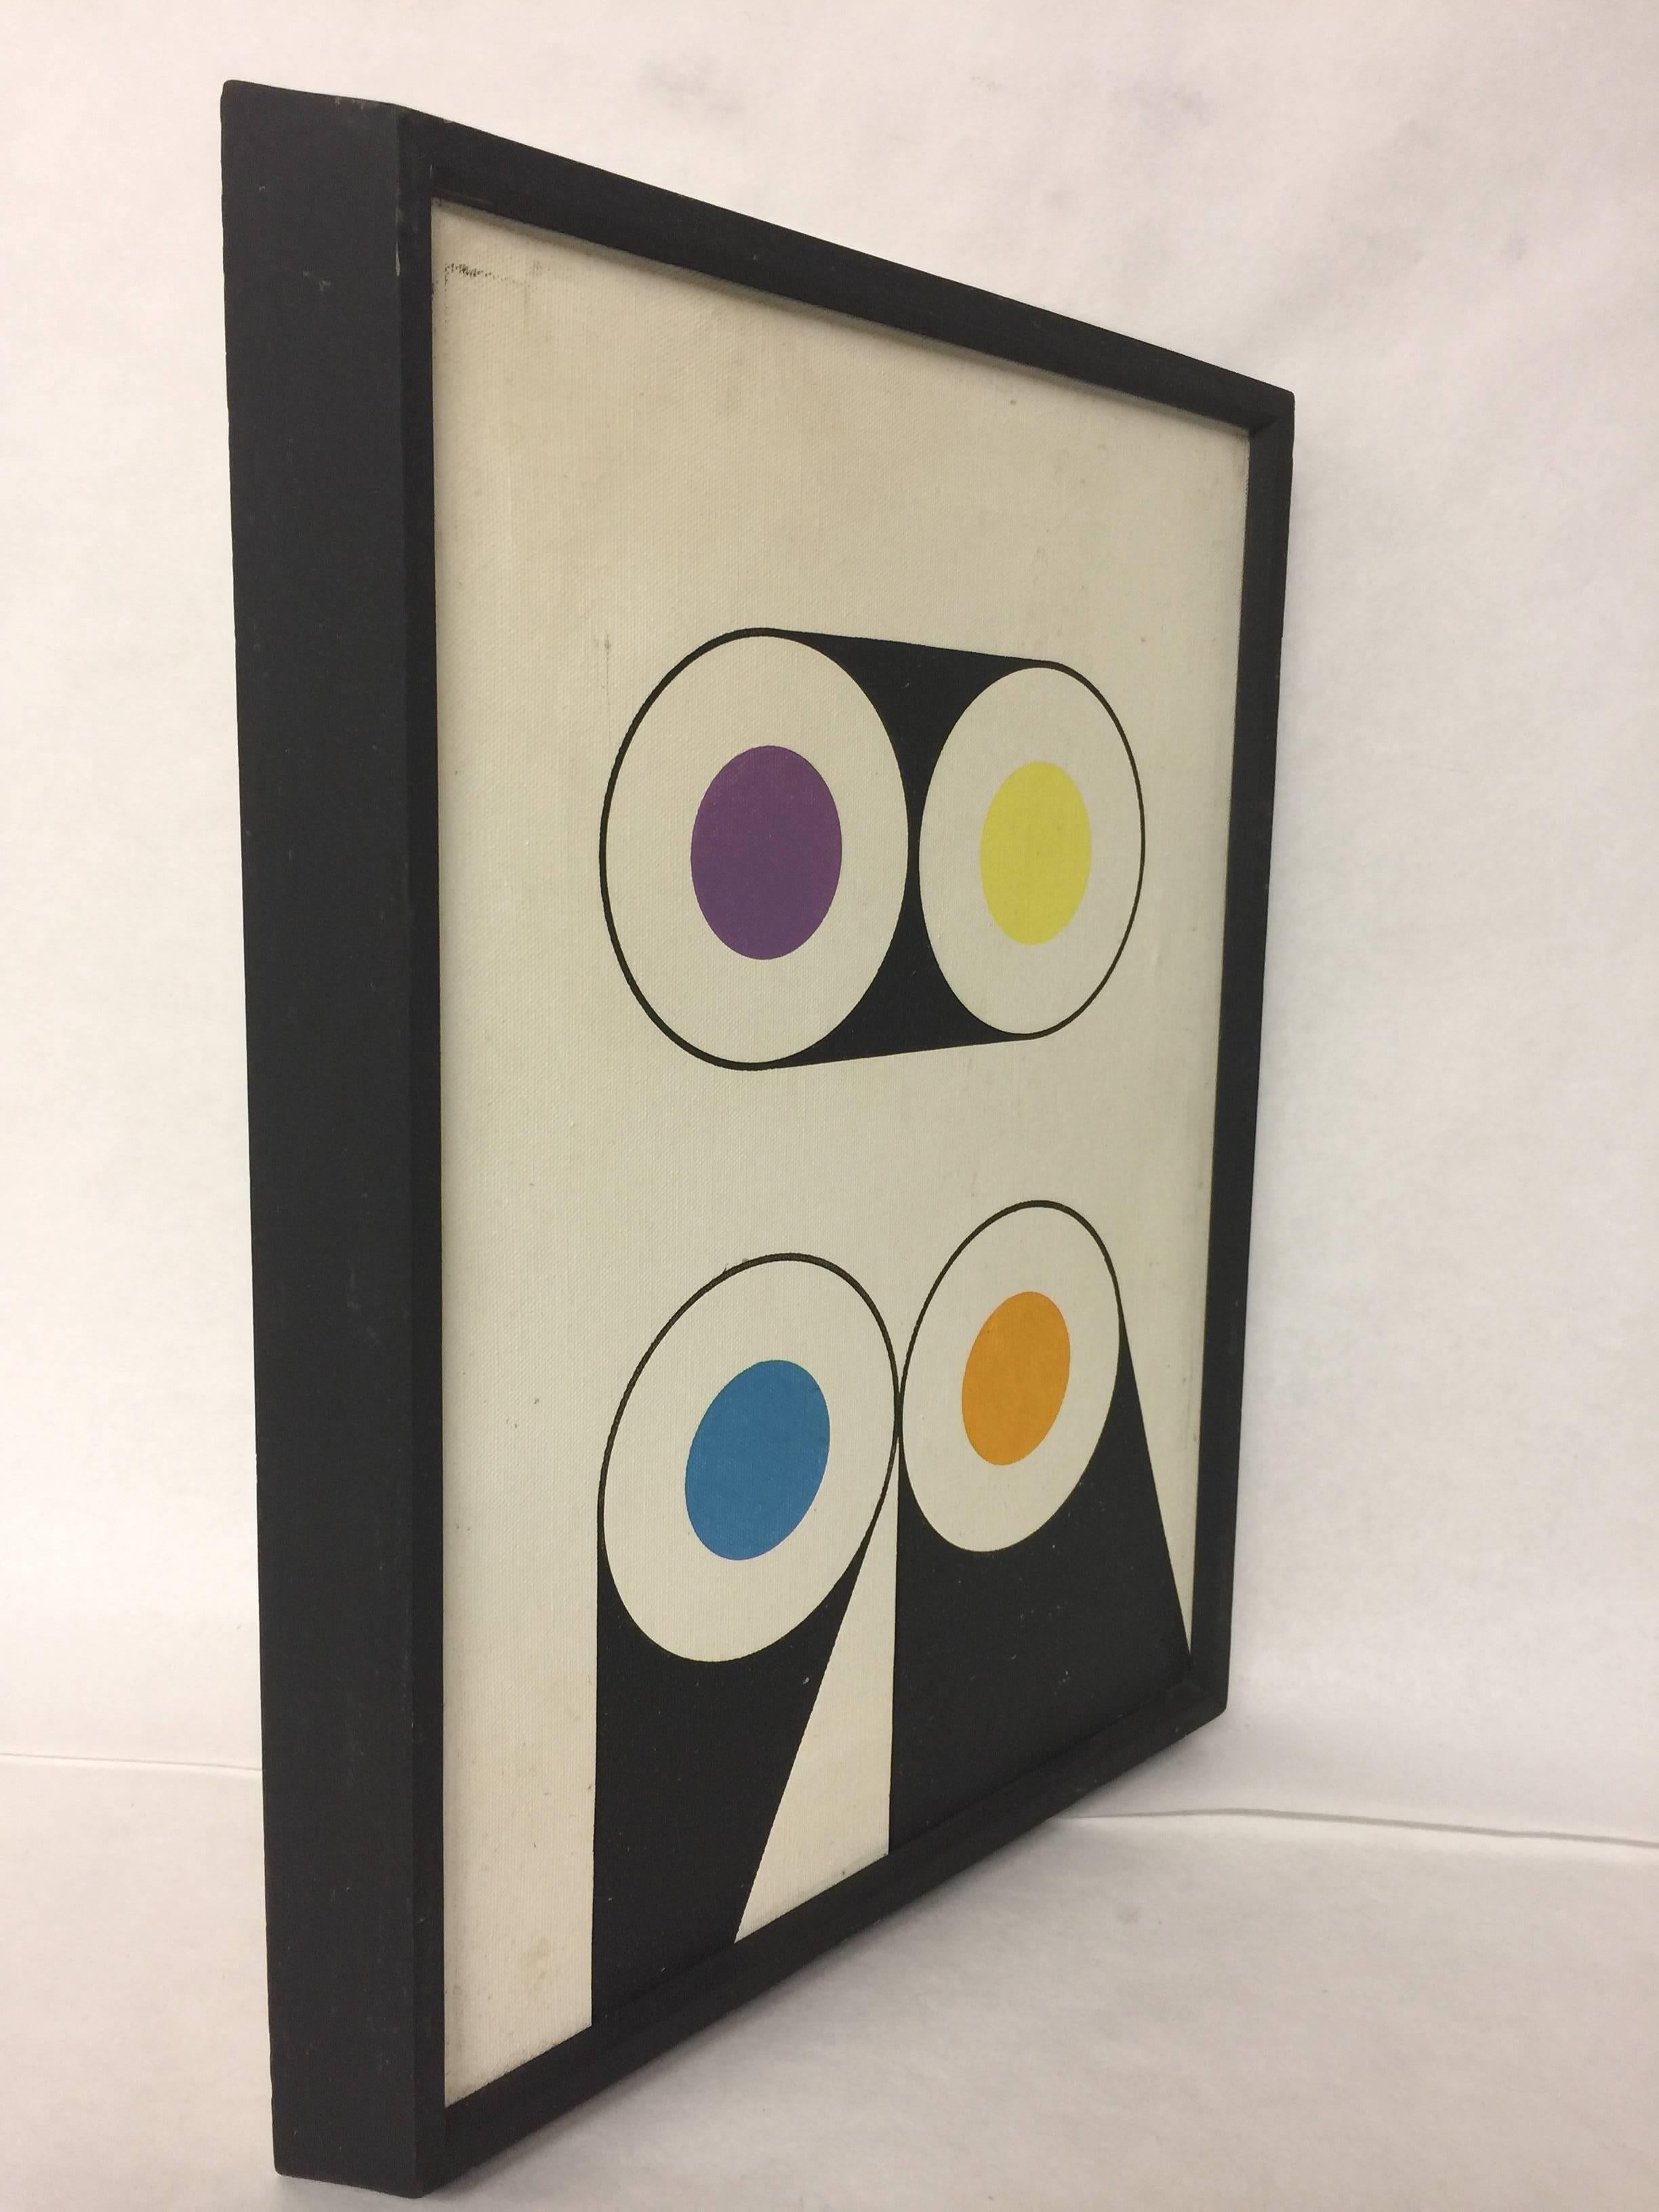 Vintage Hard Edge Geometric Abstract Oil on Canvas Painting 2 of 5, circa 1980s 1